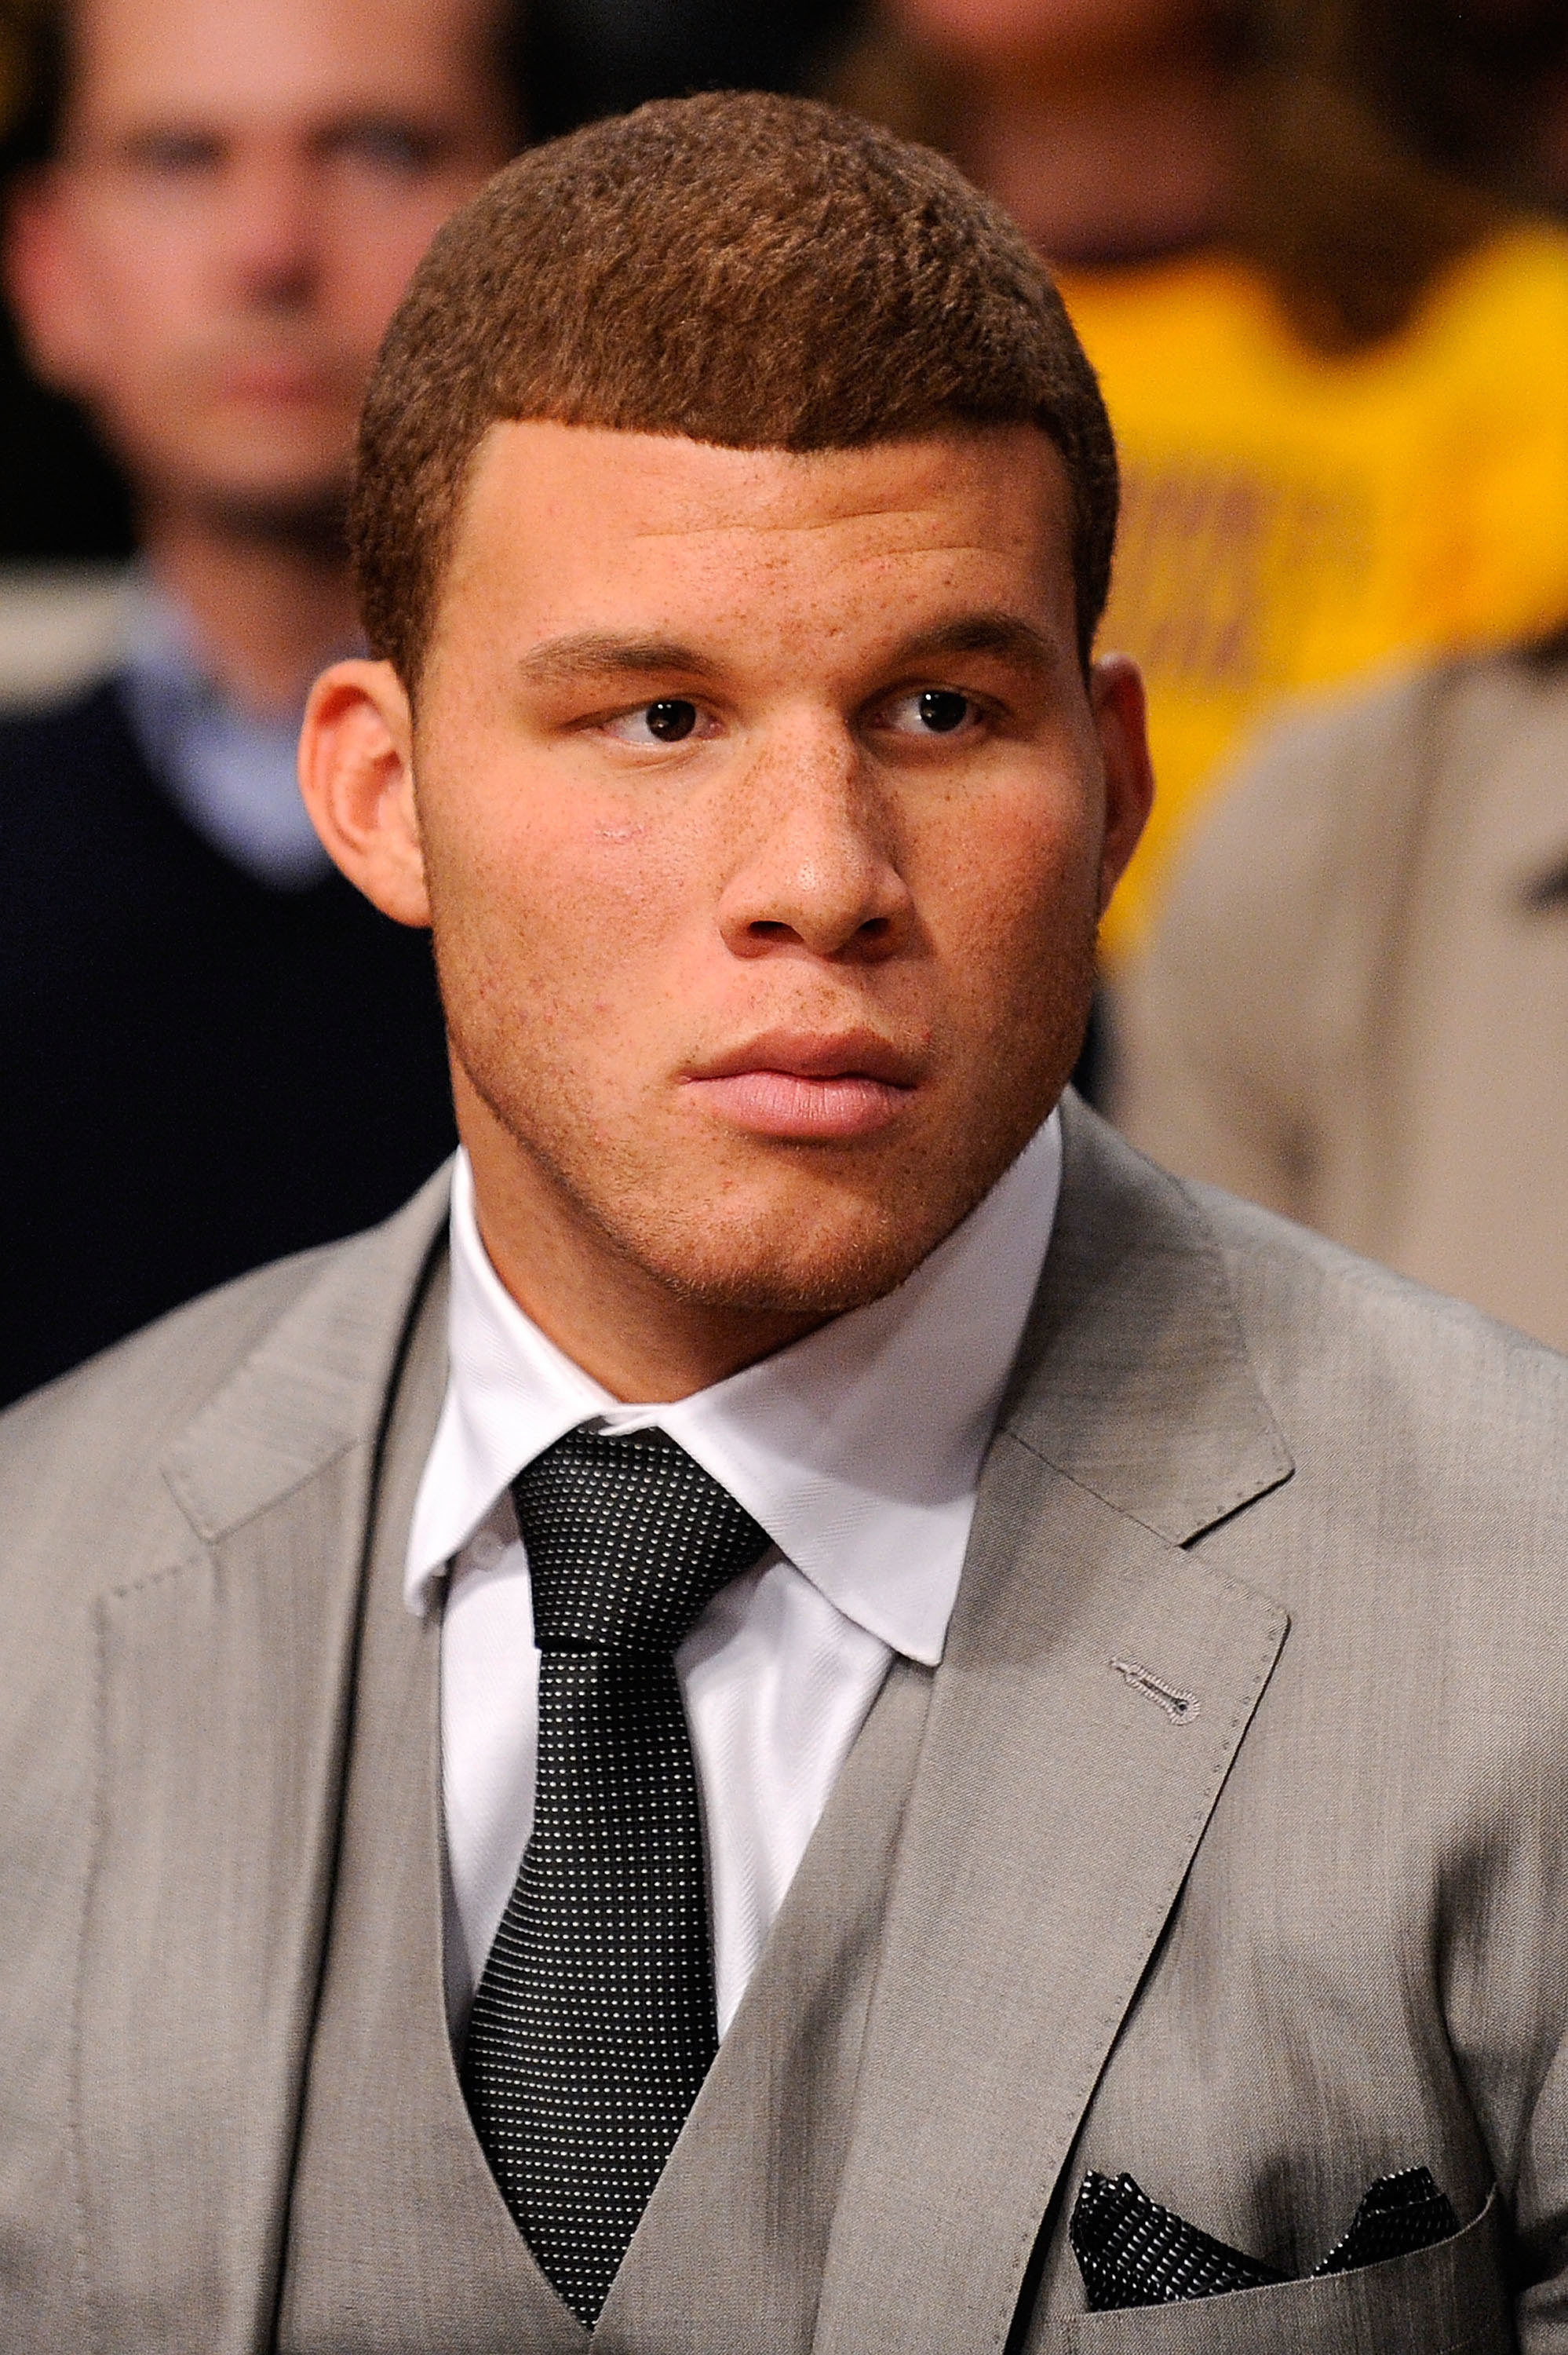 Young Blake Griffin in a suit.